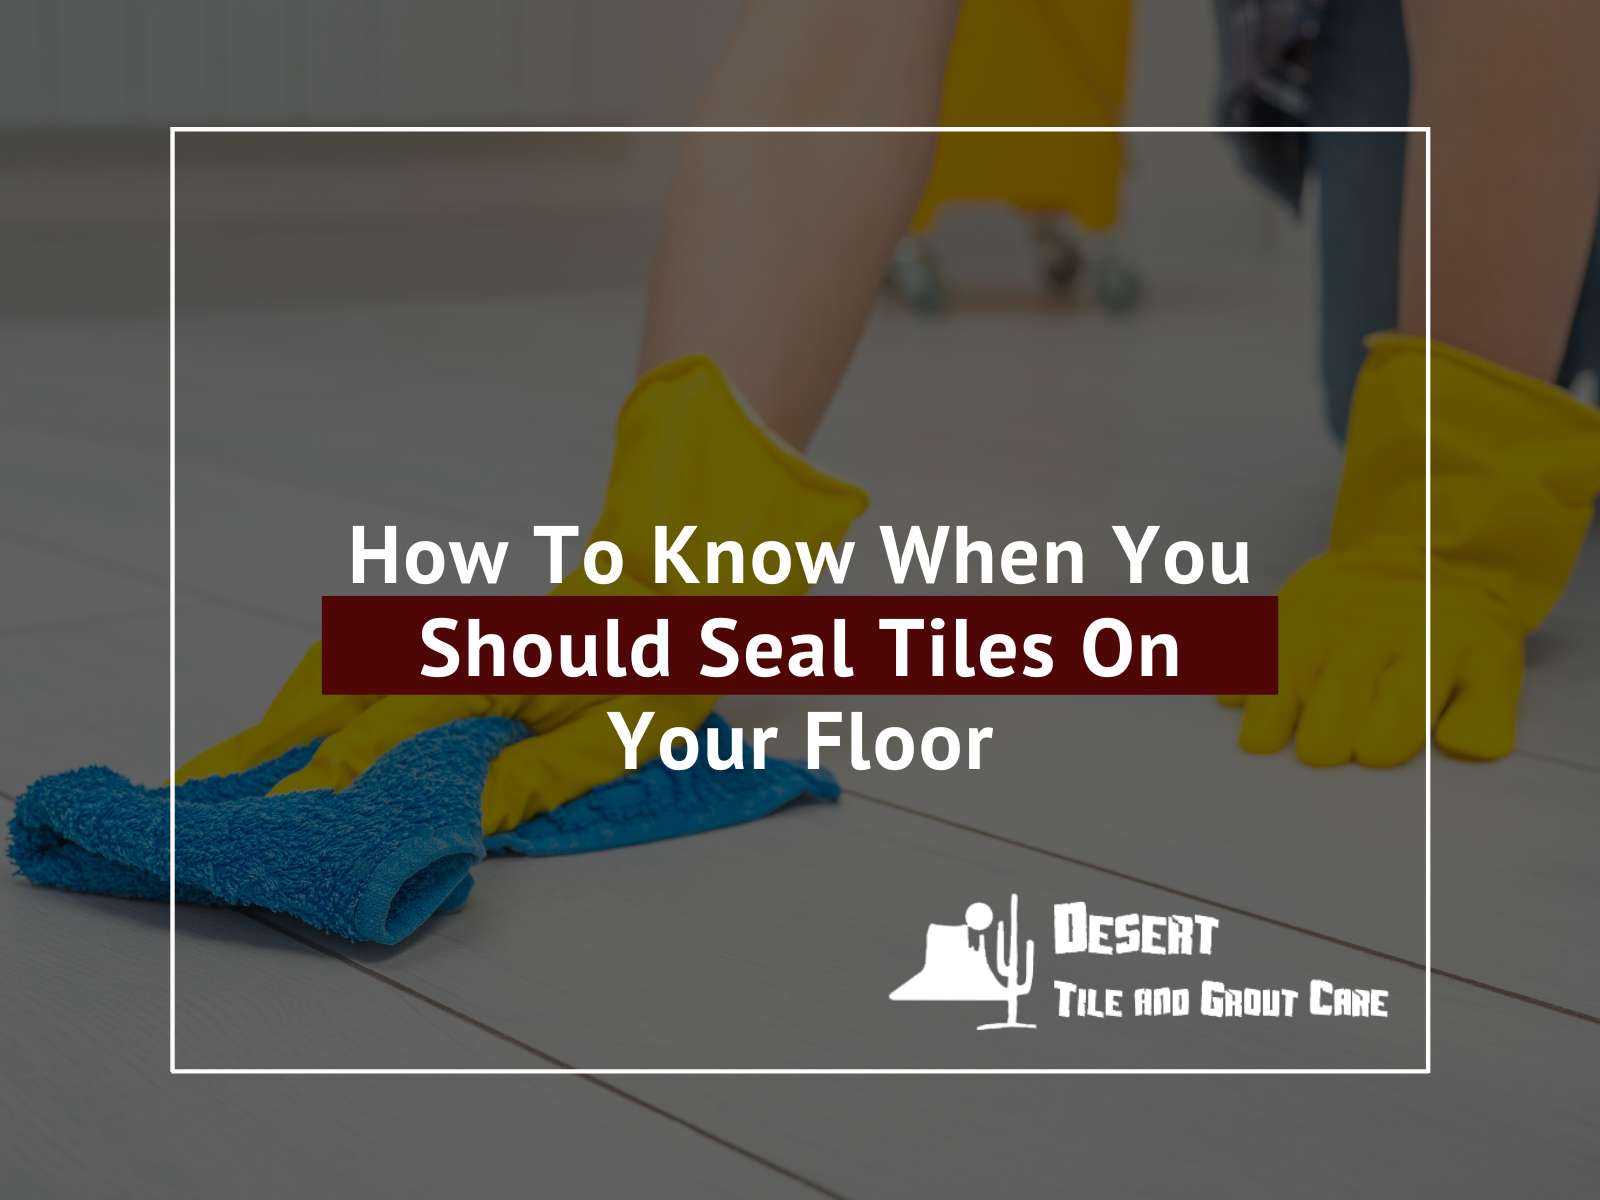 How To Know When You Should Seal Tiles On Your Floor